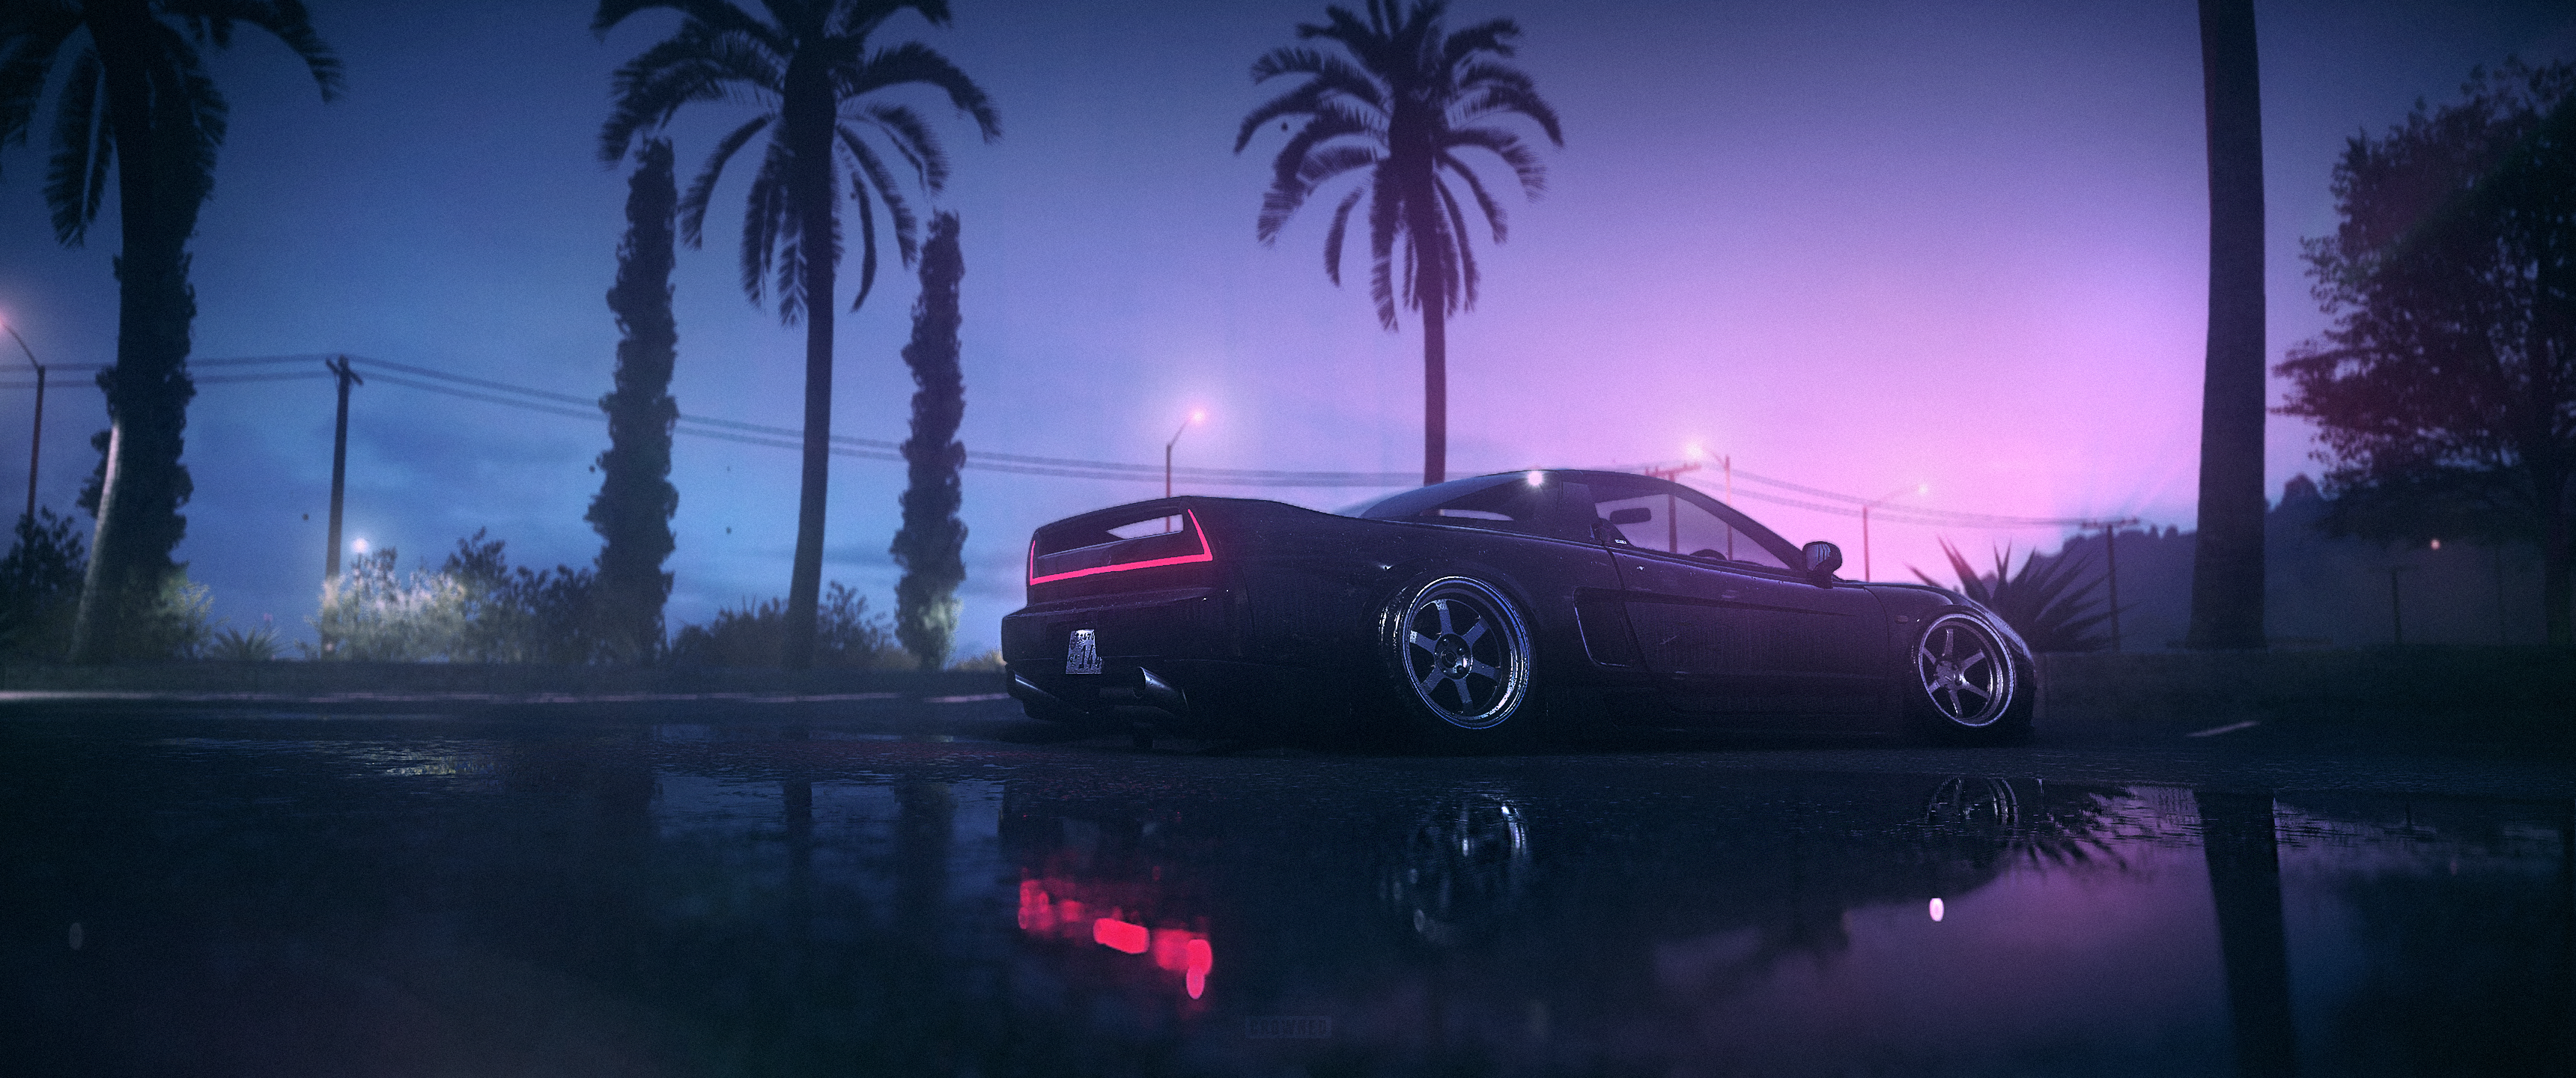 Detail Need For Speed Wallpaper Nomer 8